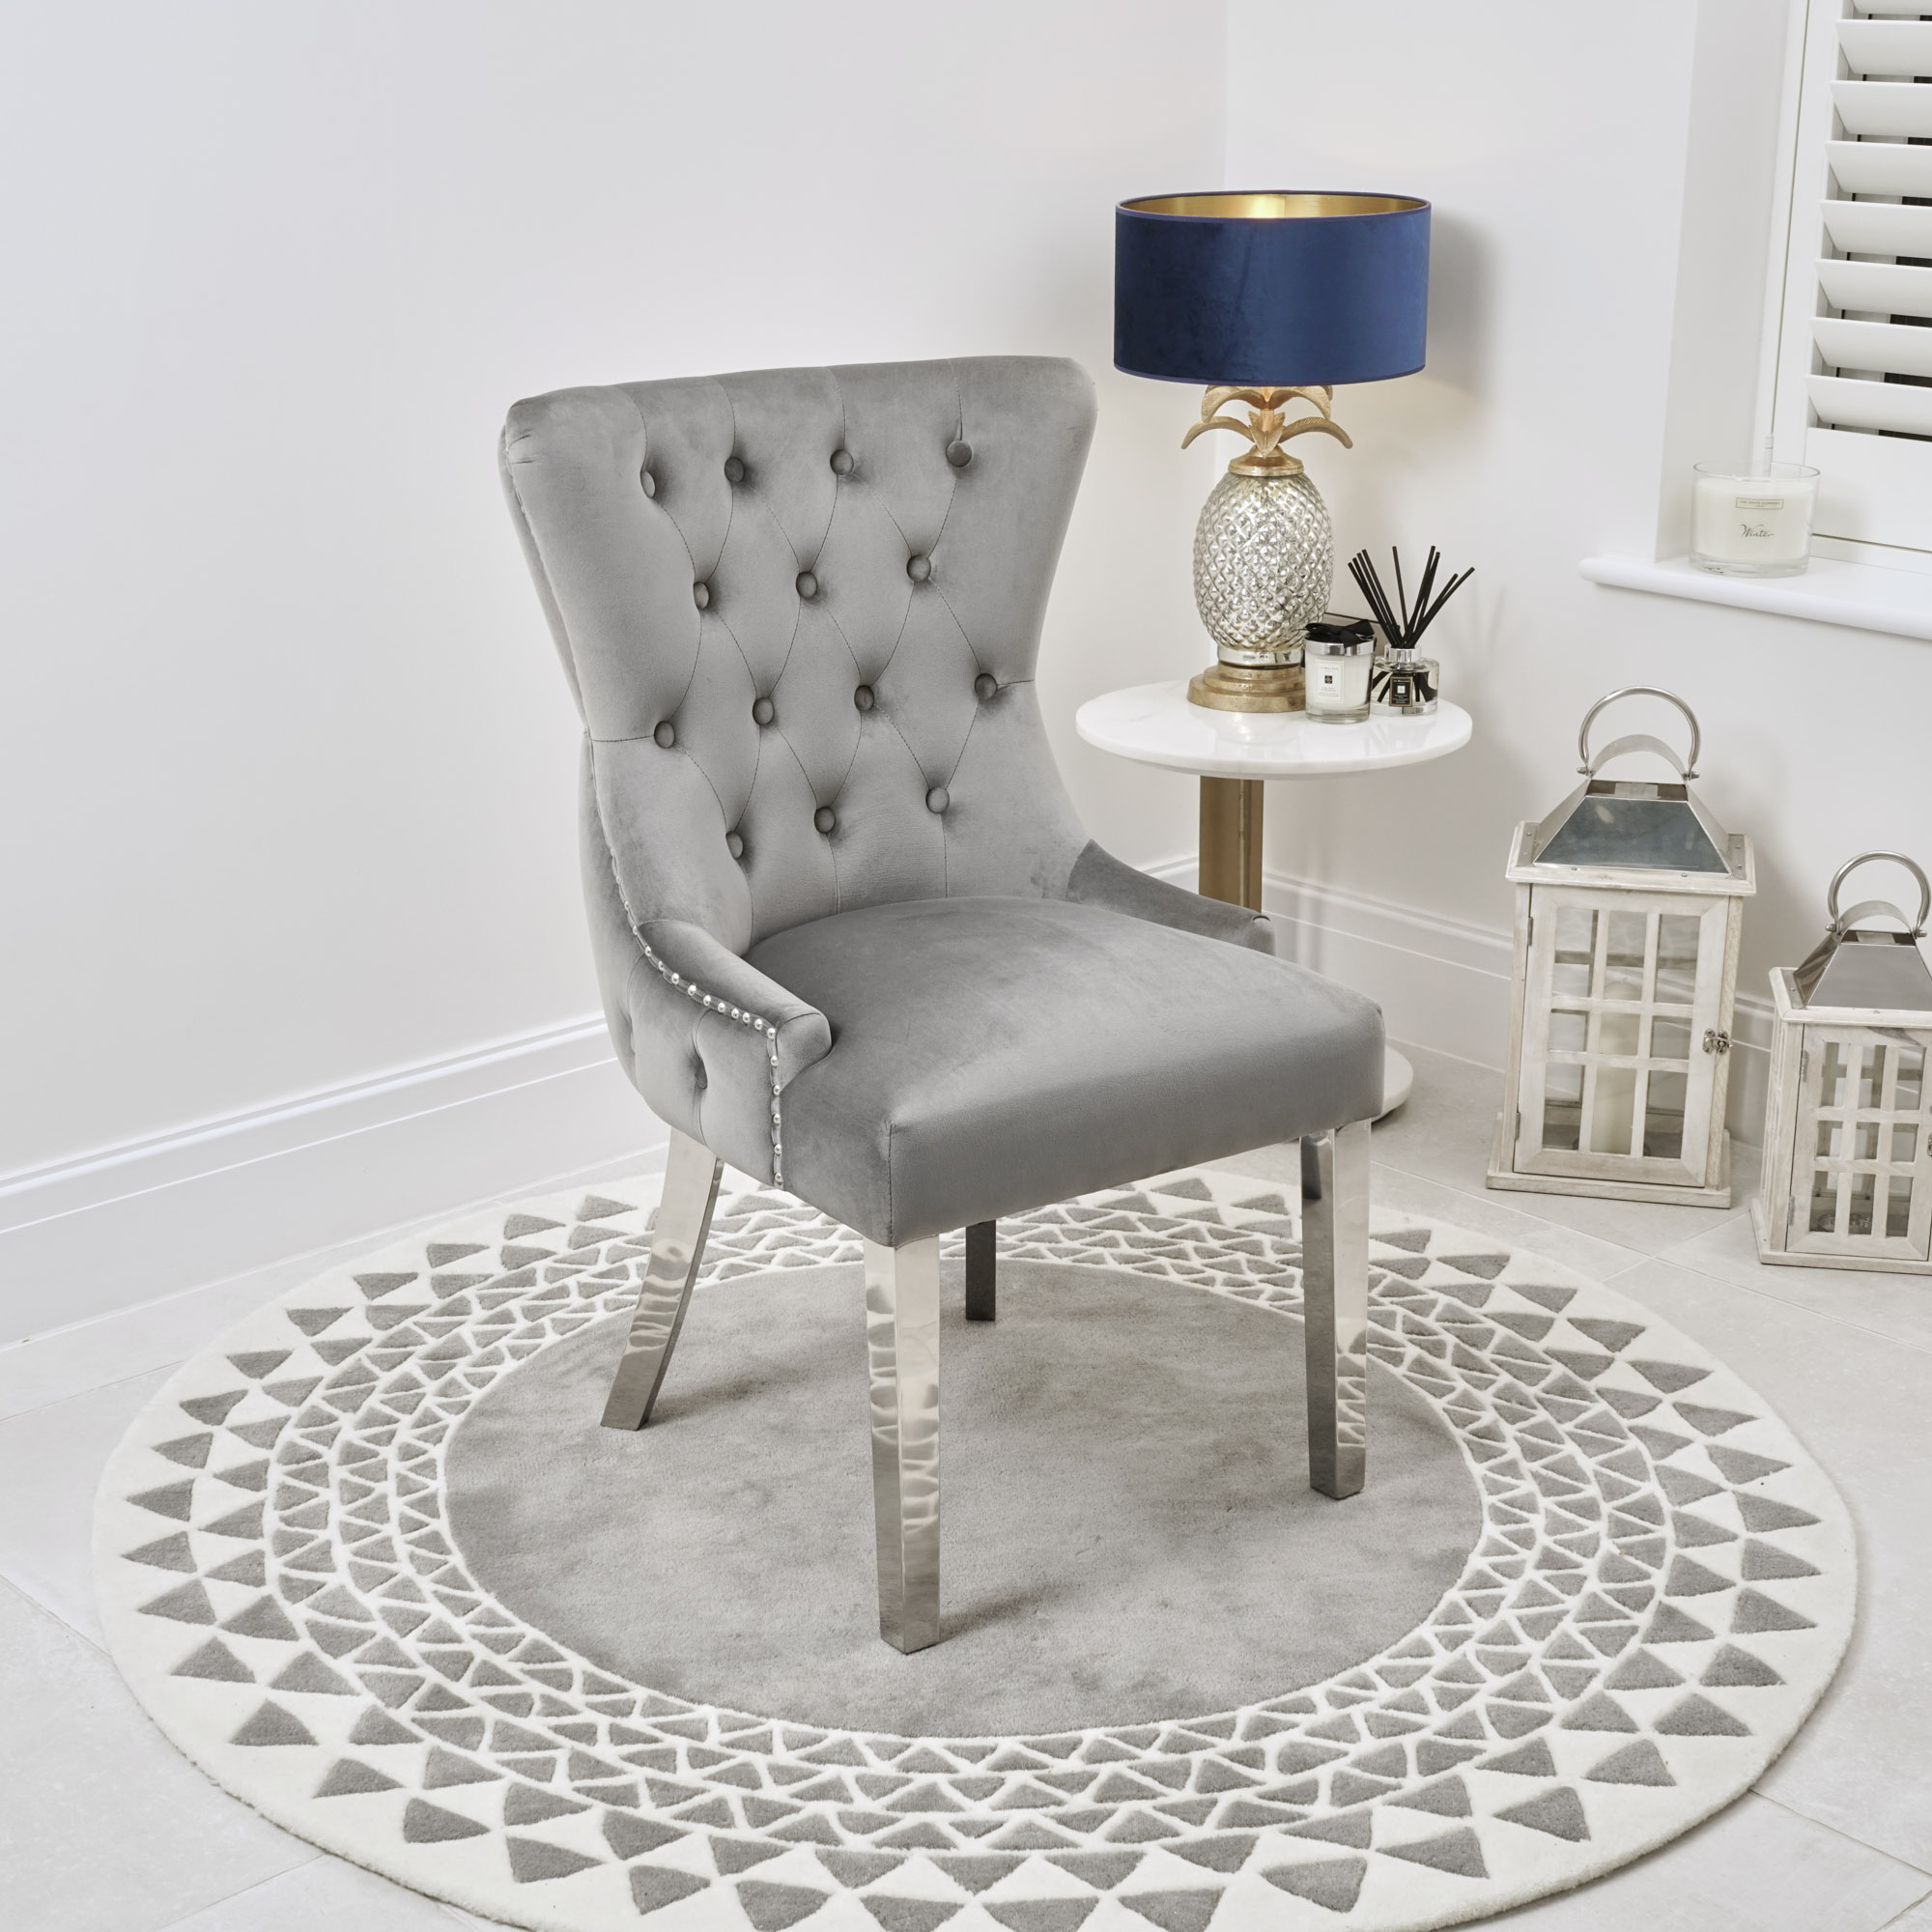 Knightsbridge Grey Velvet Upholstered Dining Room Chair With Button Tufted Detailing – Steel Legs